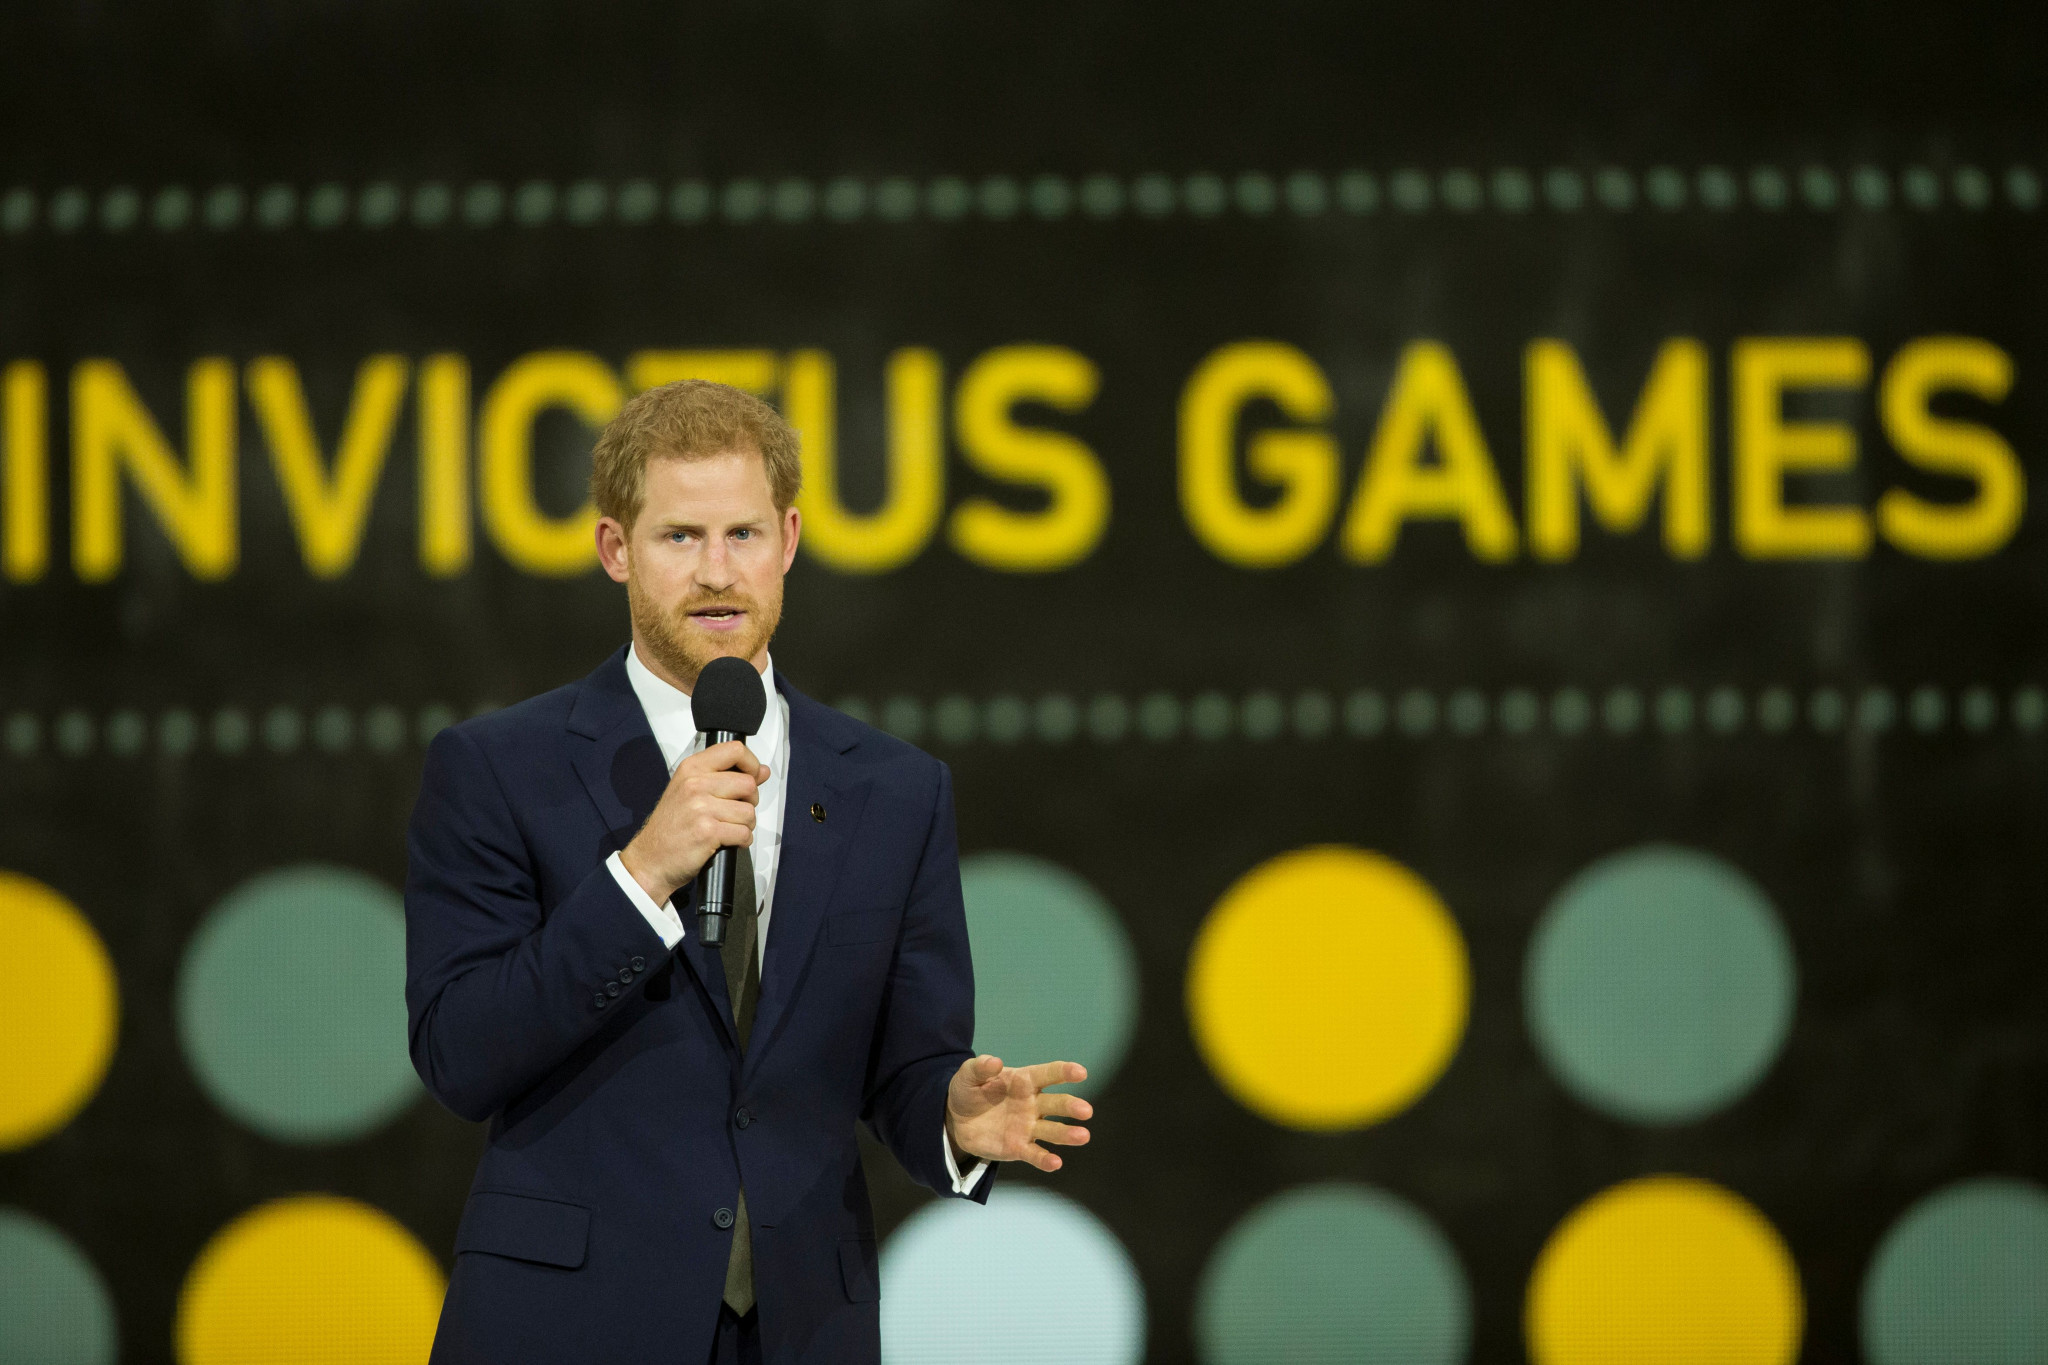 Prince Harry delivers inspirational speech as Invictus Games begin